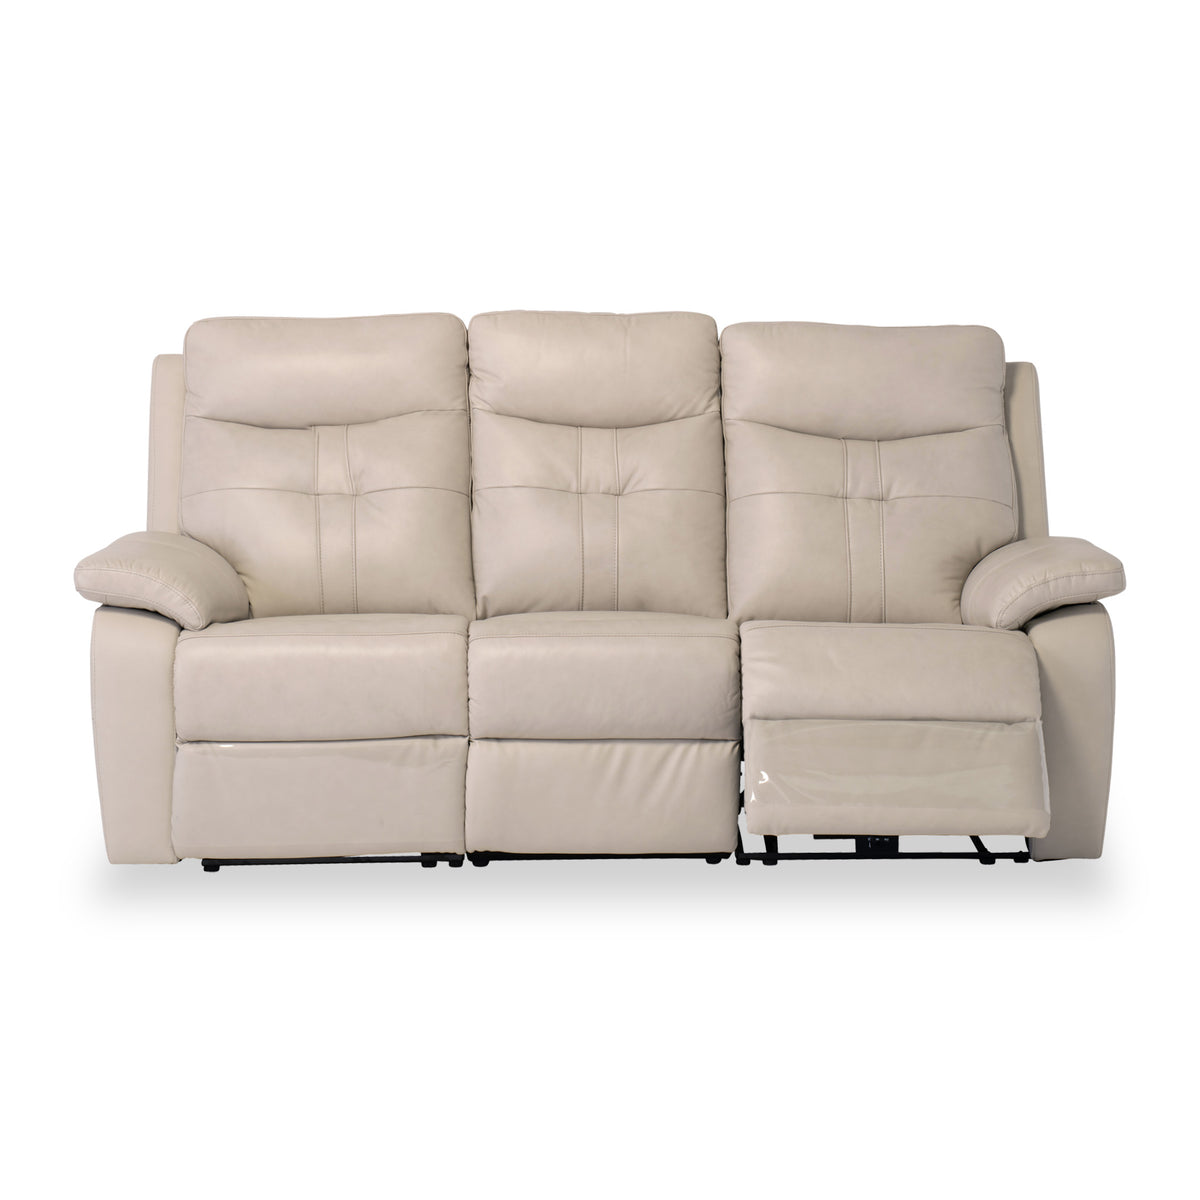 Talbot Light Stone Leather Electric Reclining 3 Seater Sofa from Roseland Furniture